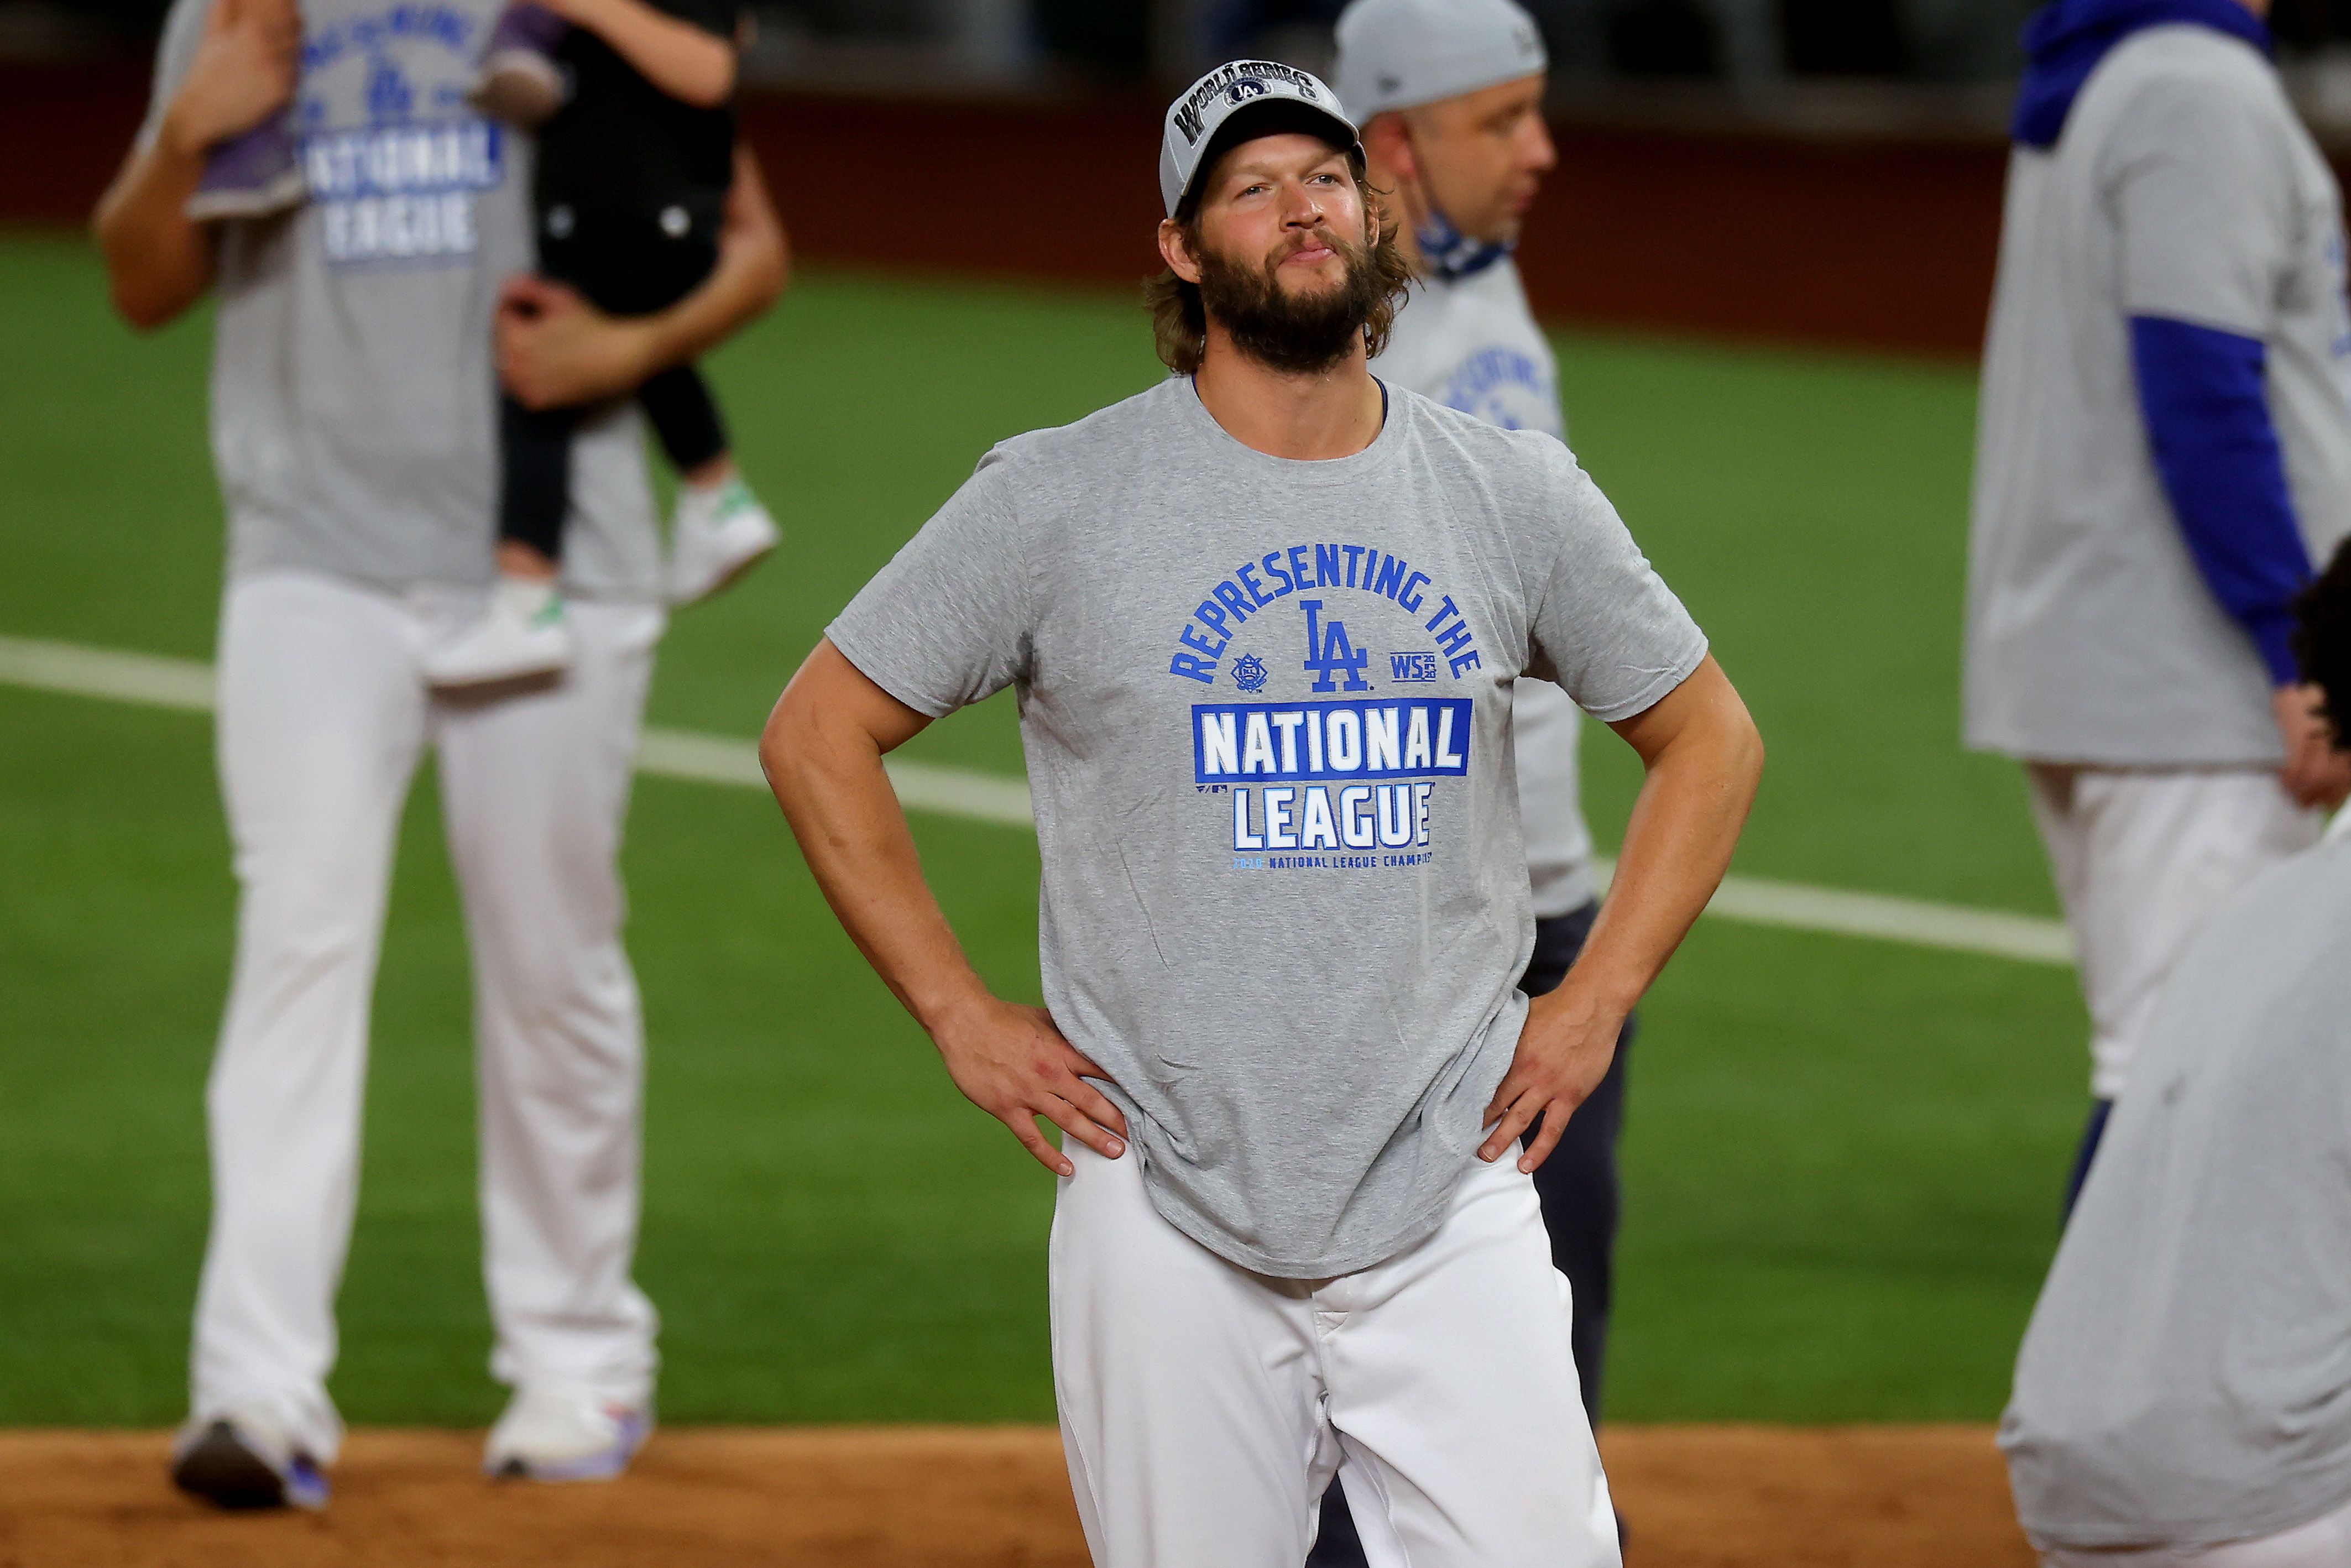 Dodgers' Clayton Kershaw will go in Game 1, giving him another big